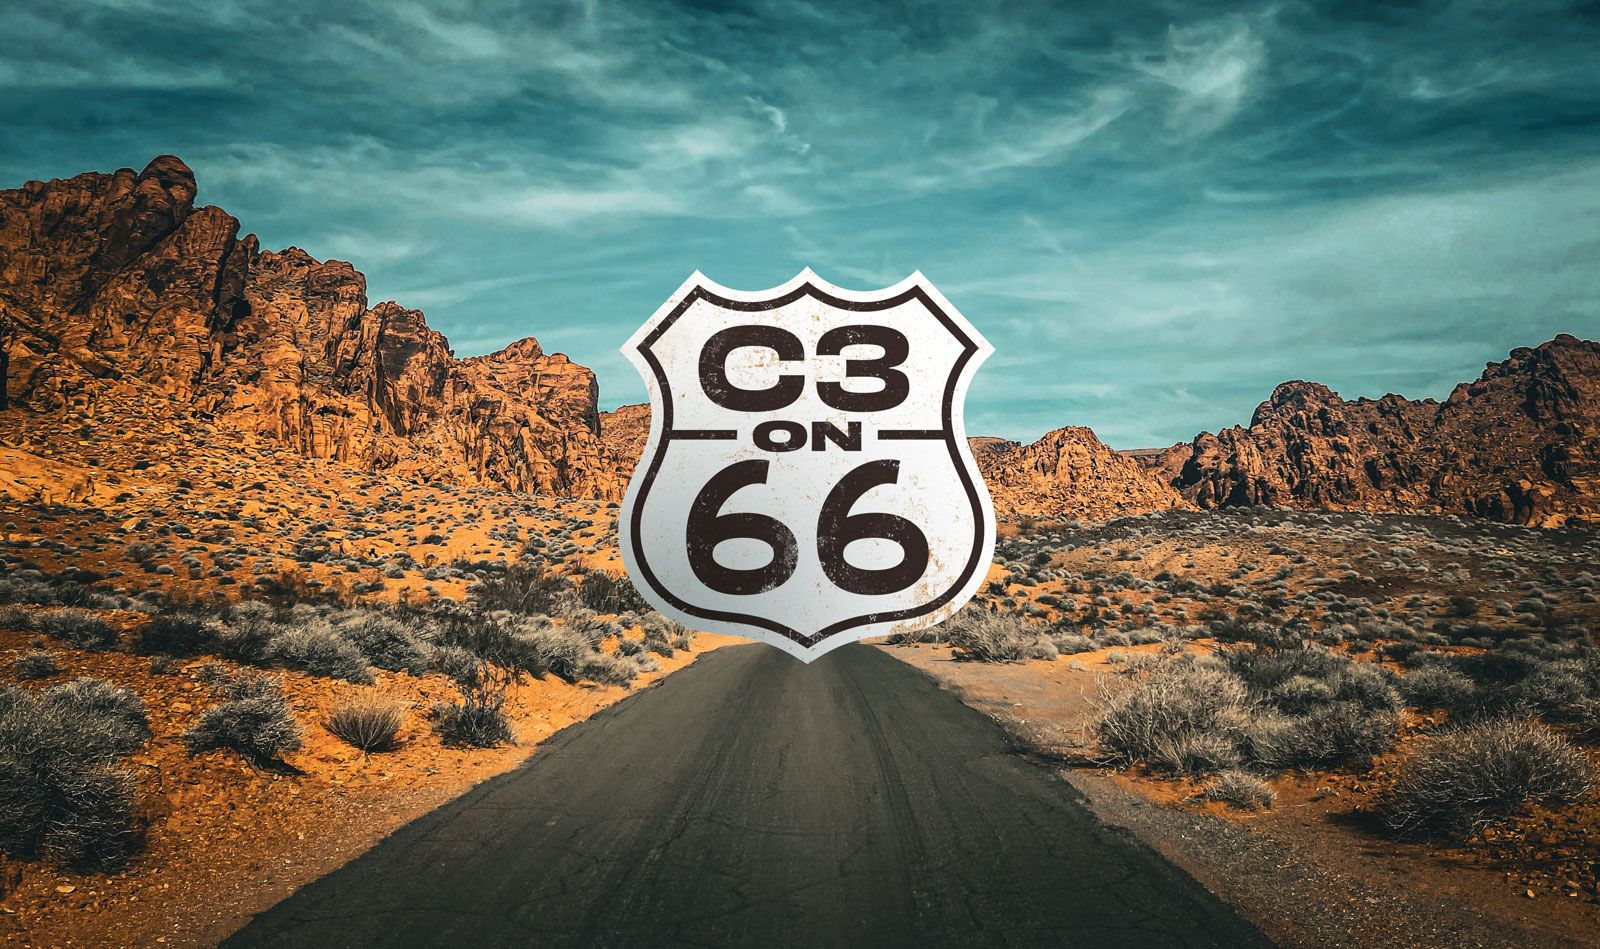 A road sign that says c 3 on 6 6